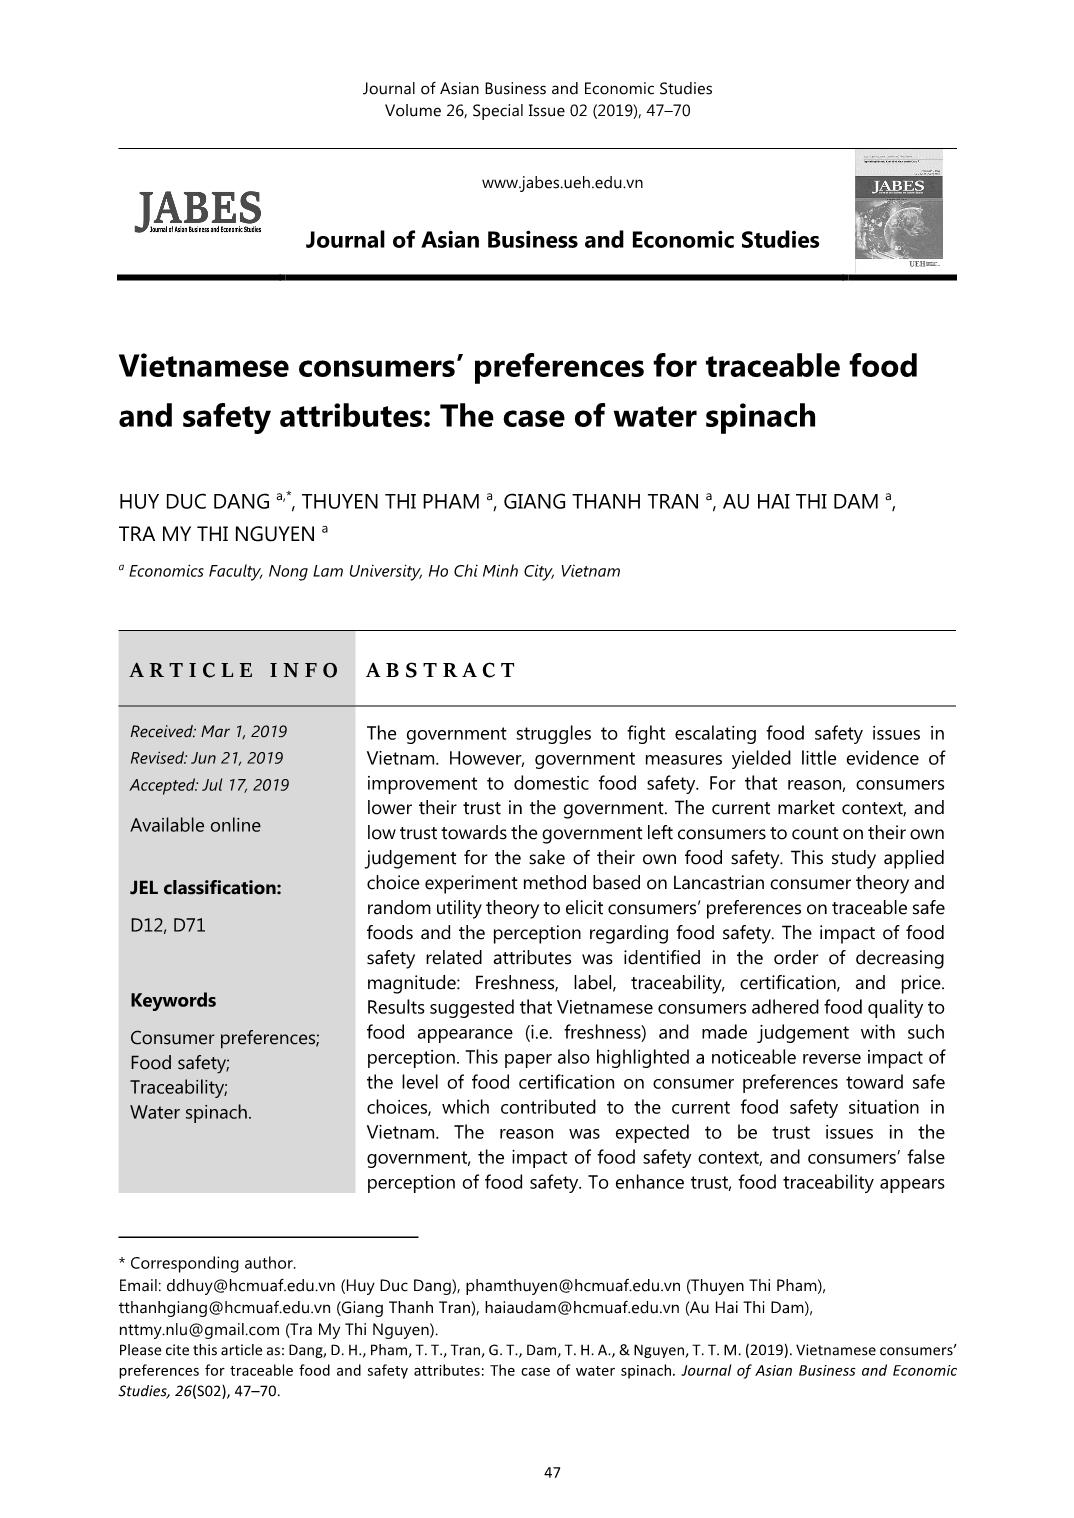 Vietnamese consumers’ preferences for traceable food and safety attributes: The case of water spinach trang 1